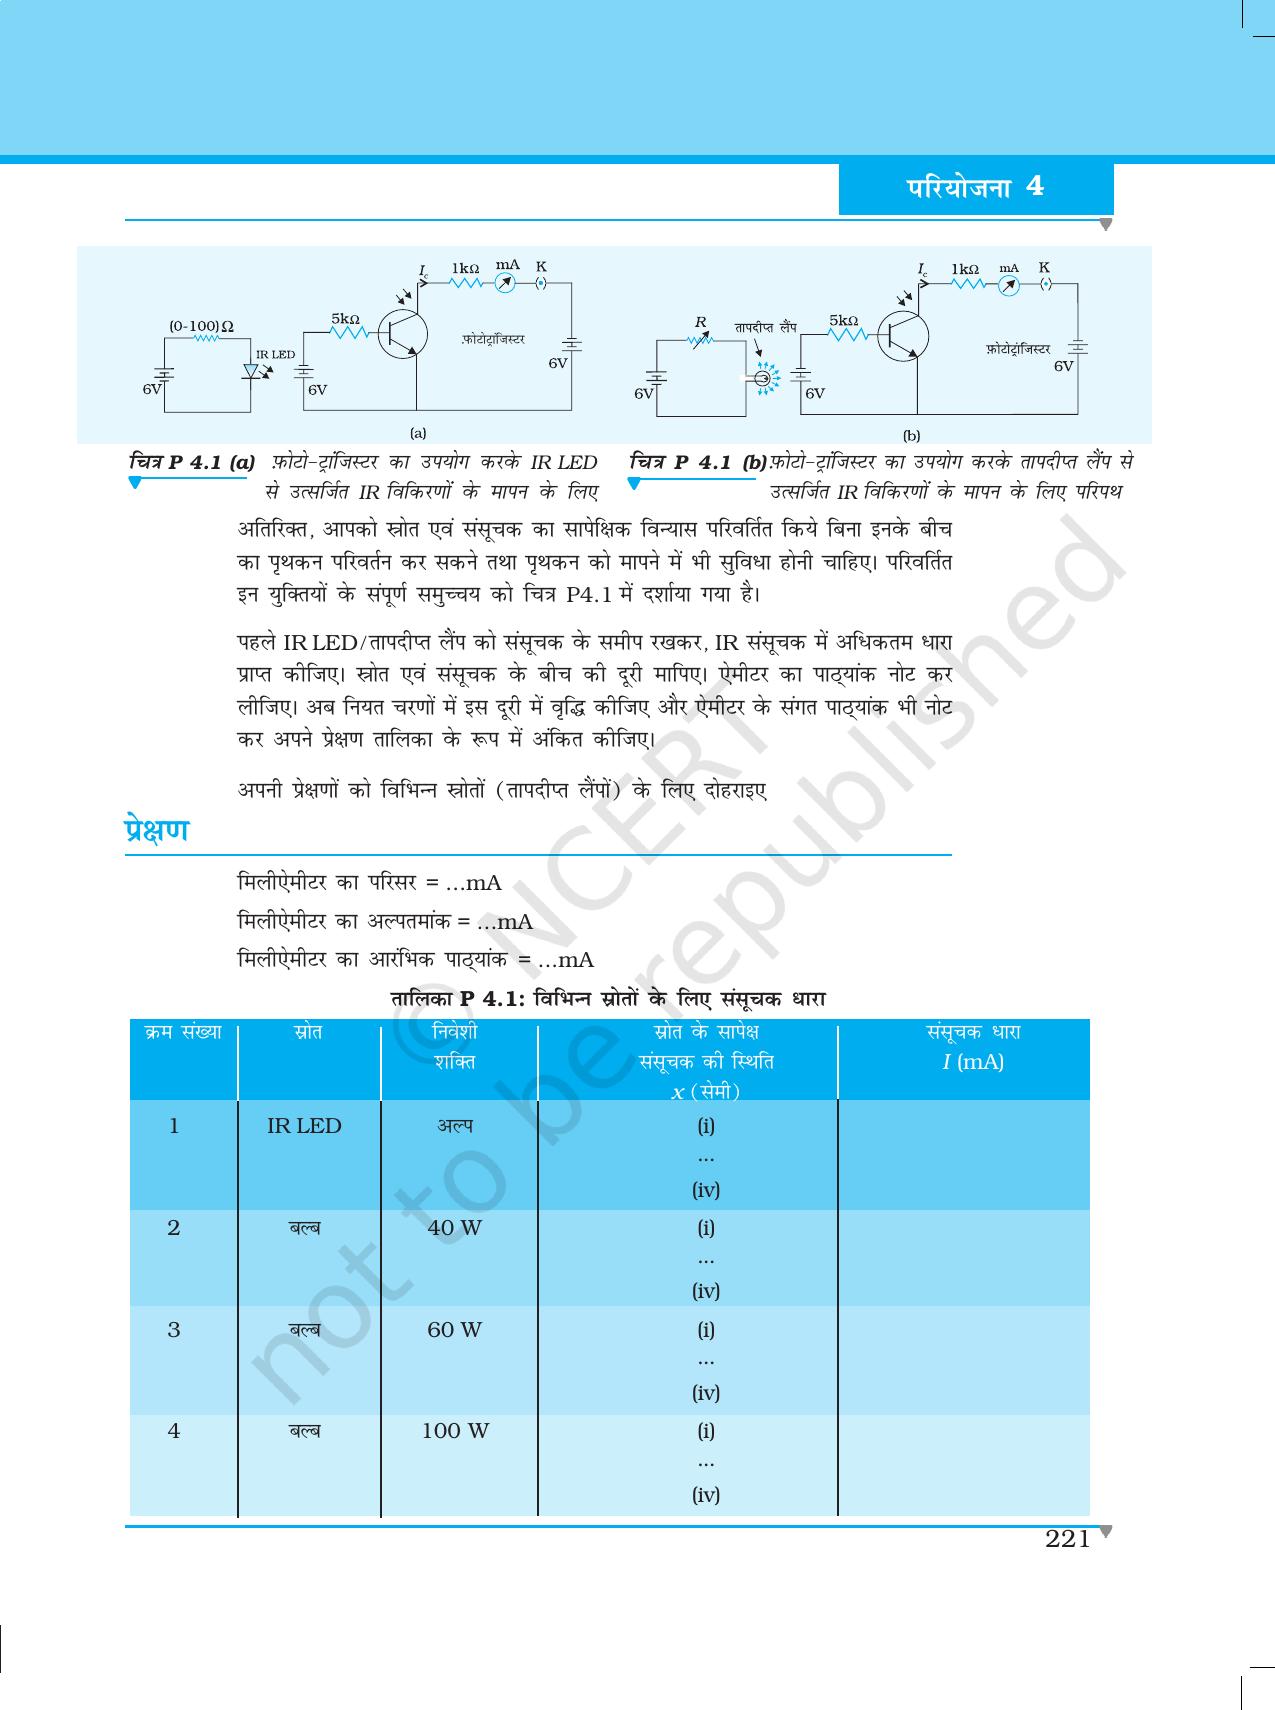 NCERT Laboratory Manuals for Class XII भौतिकी - परियोजना (1 - 7) - Page 15